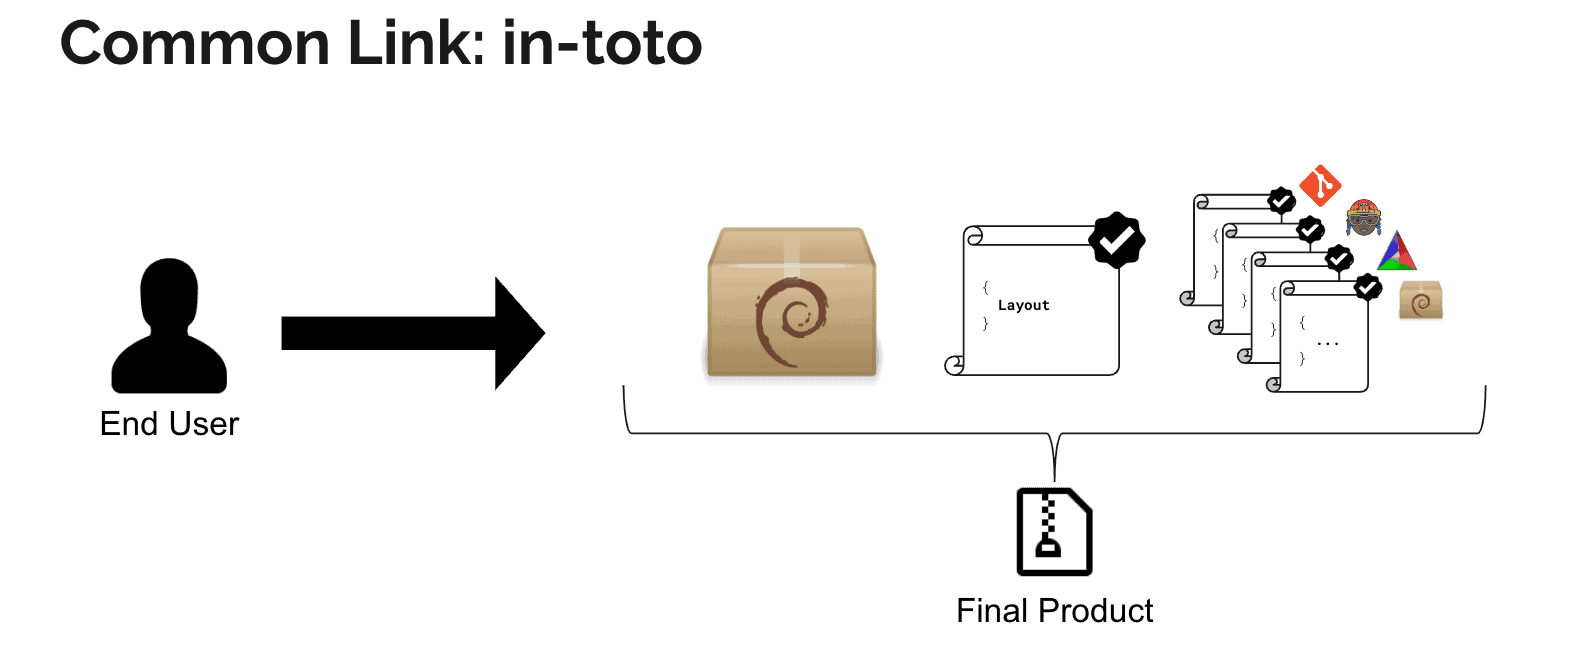 Diagram flow Common Link: in-toto showing flow between end user to final product